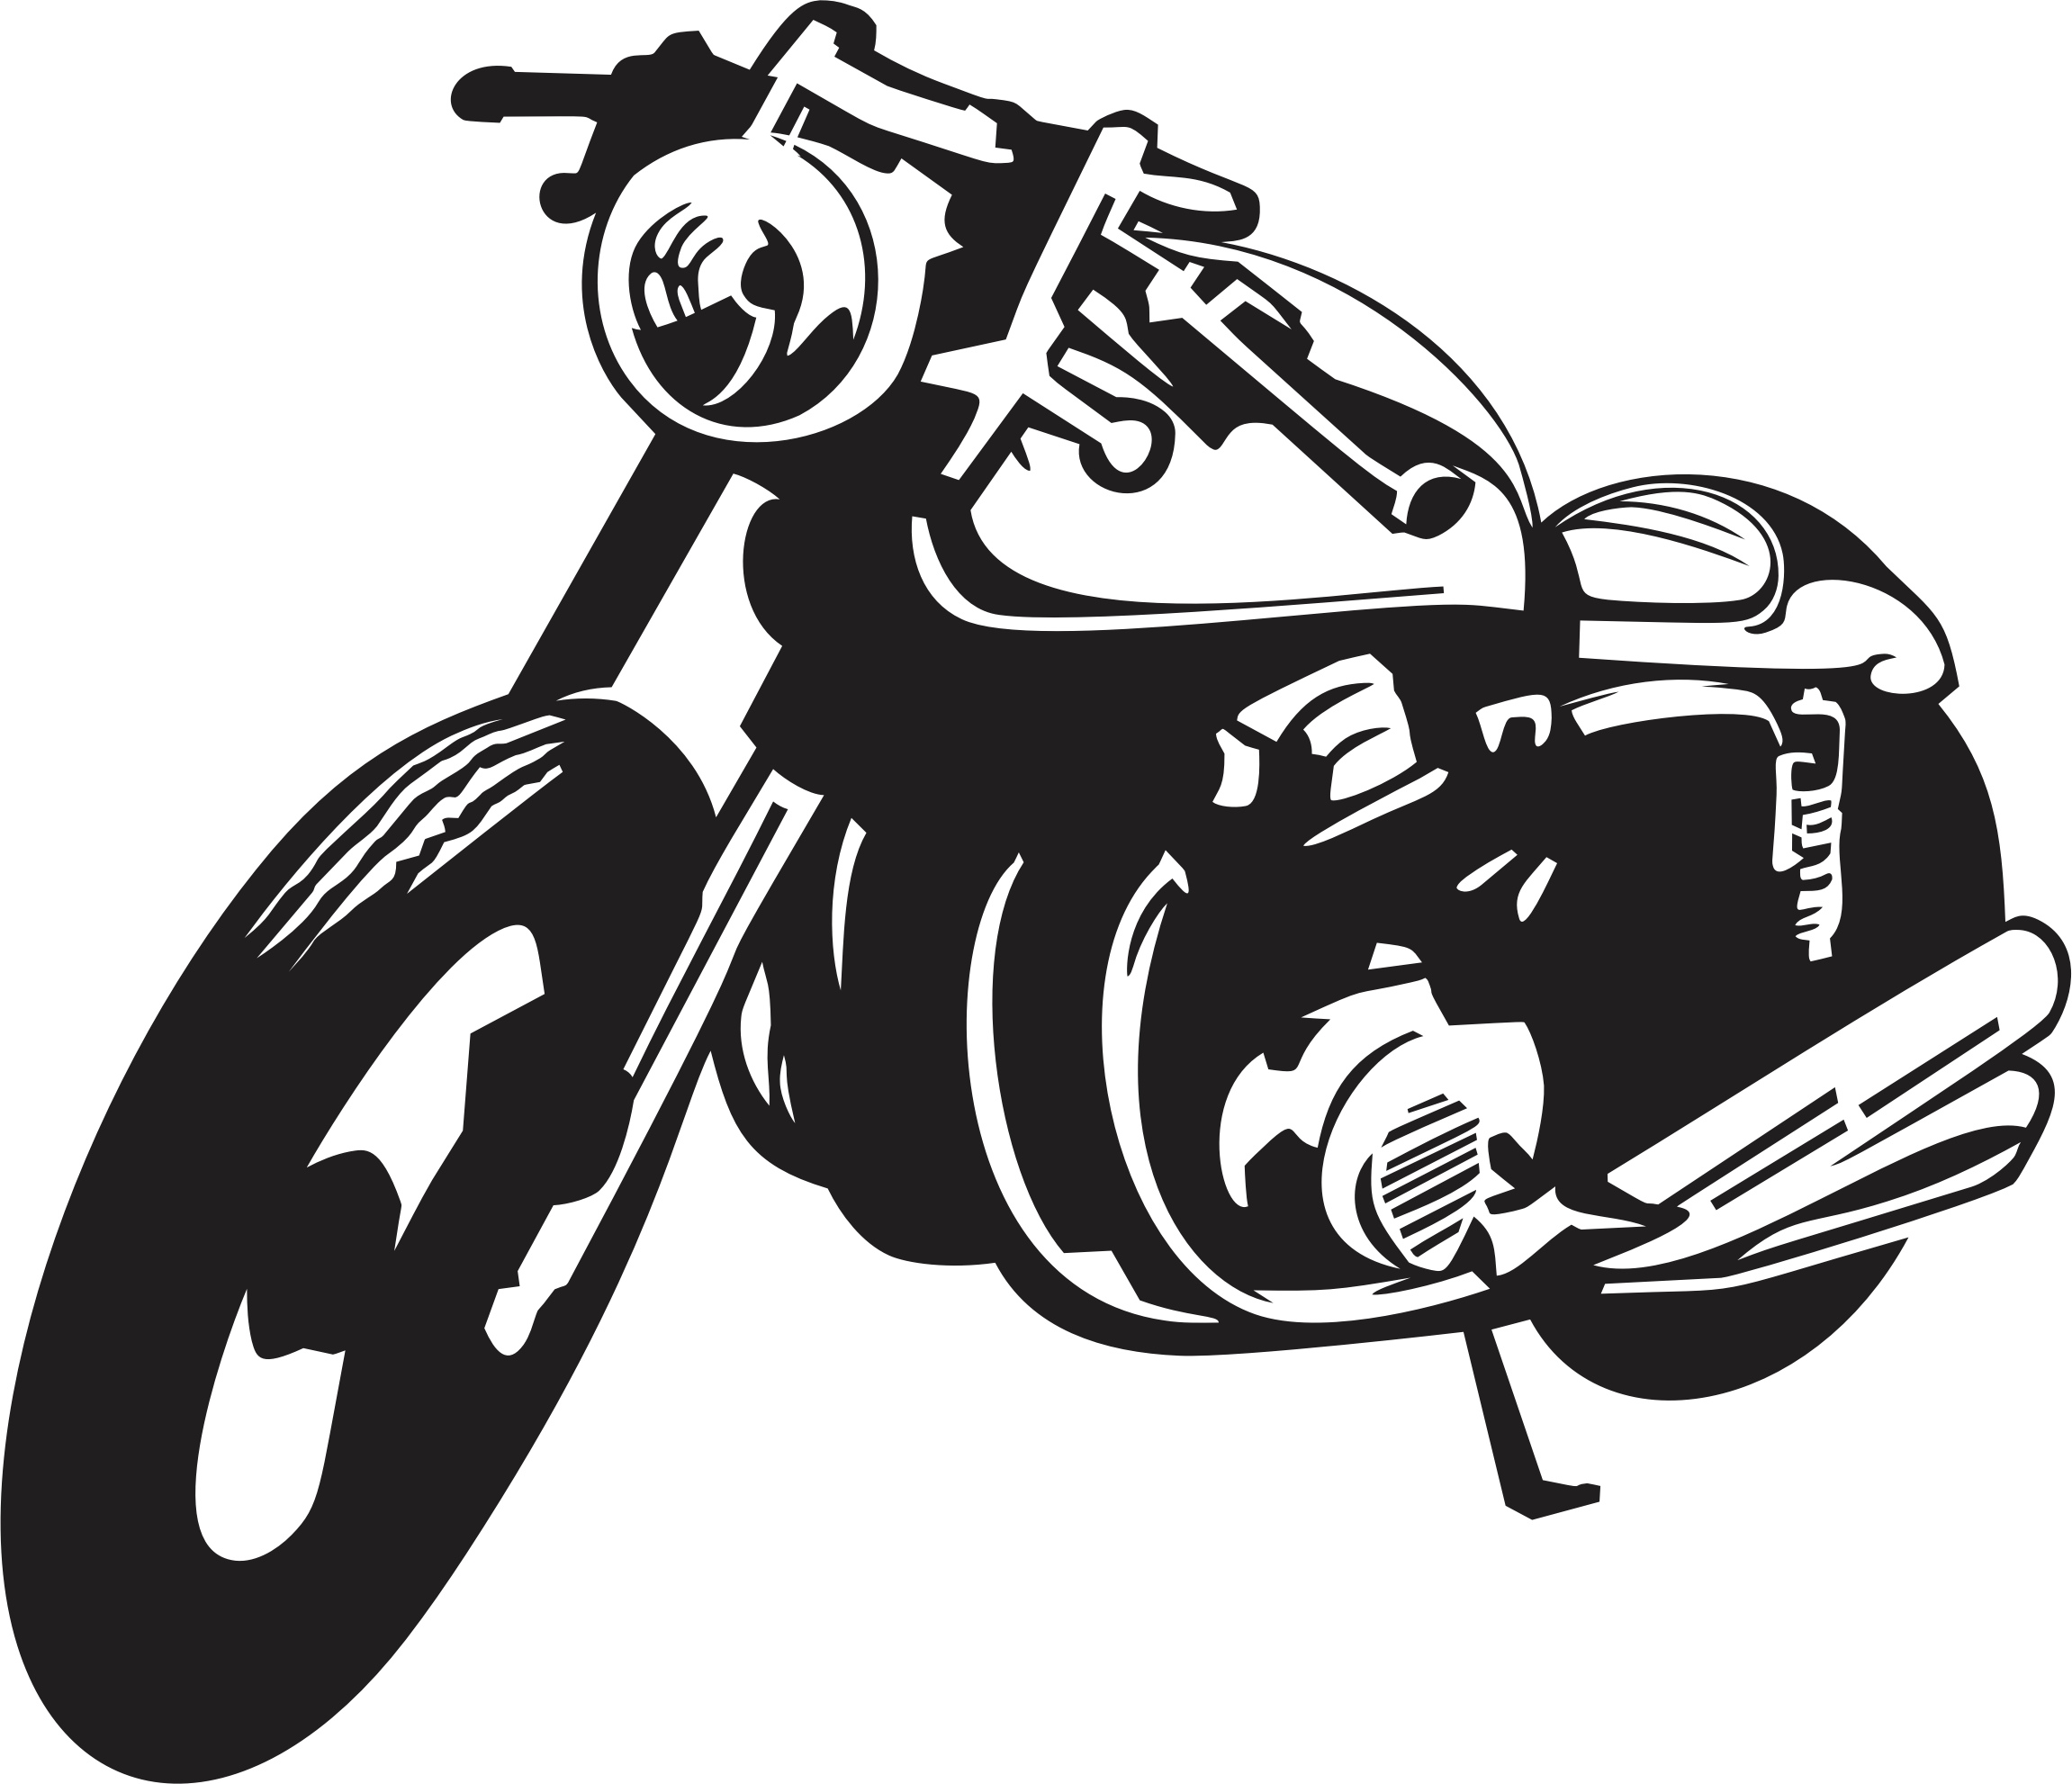 motorcycle clipart vintage motorcycle